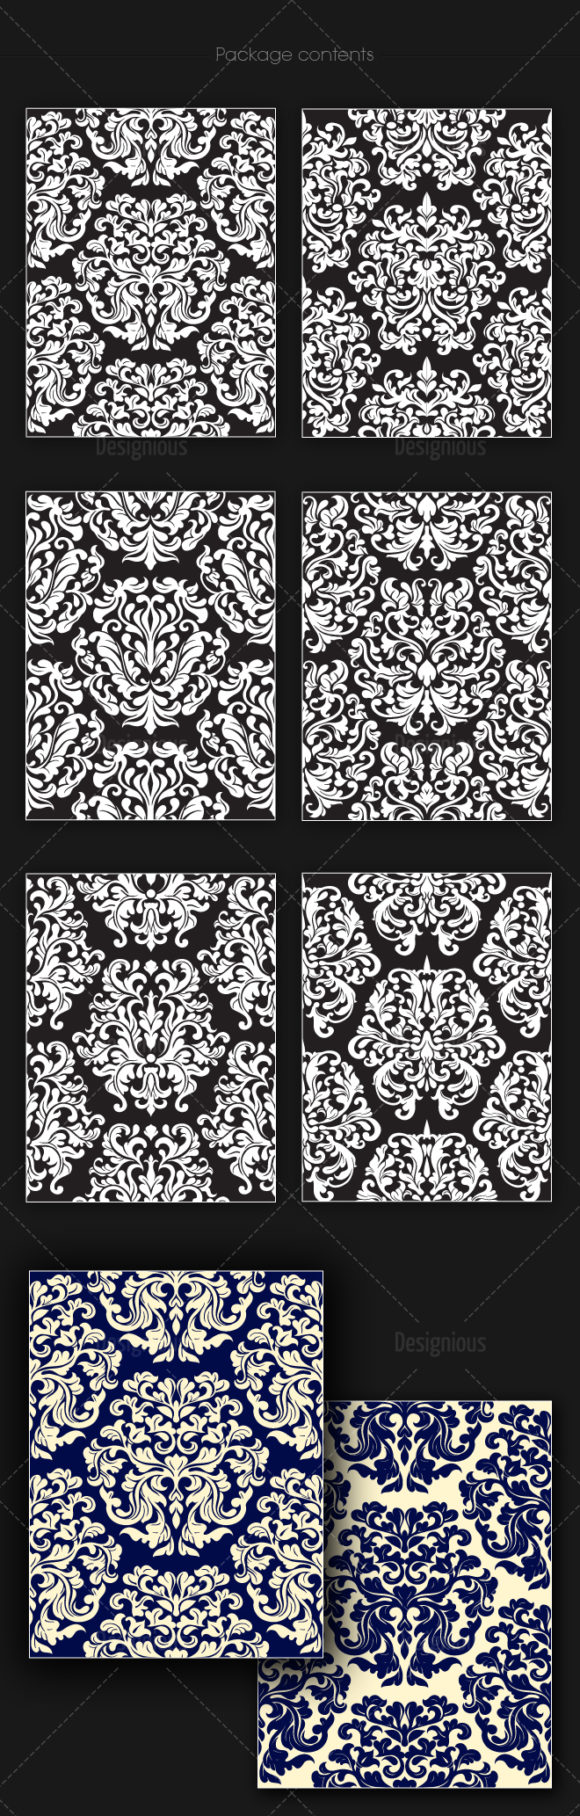 Seamless Patterns Vector Pack 145 2